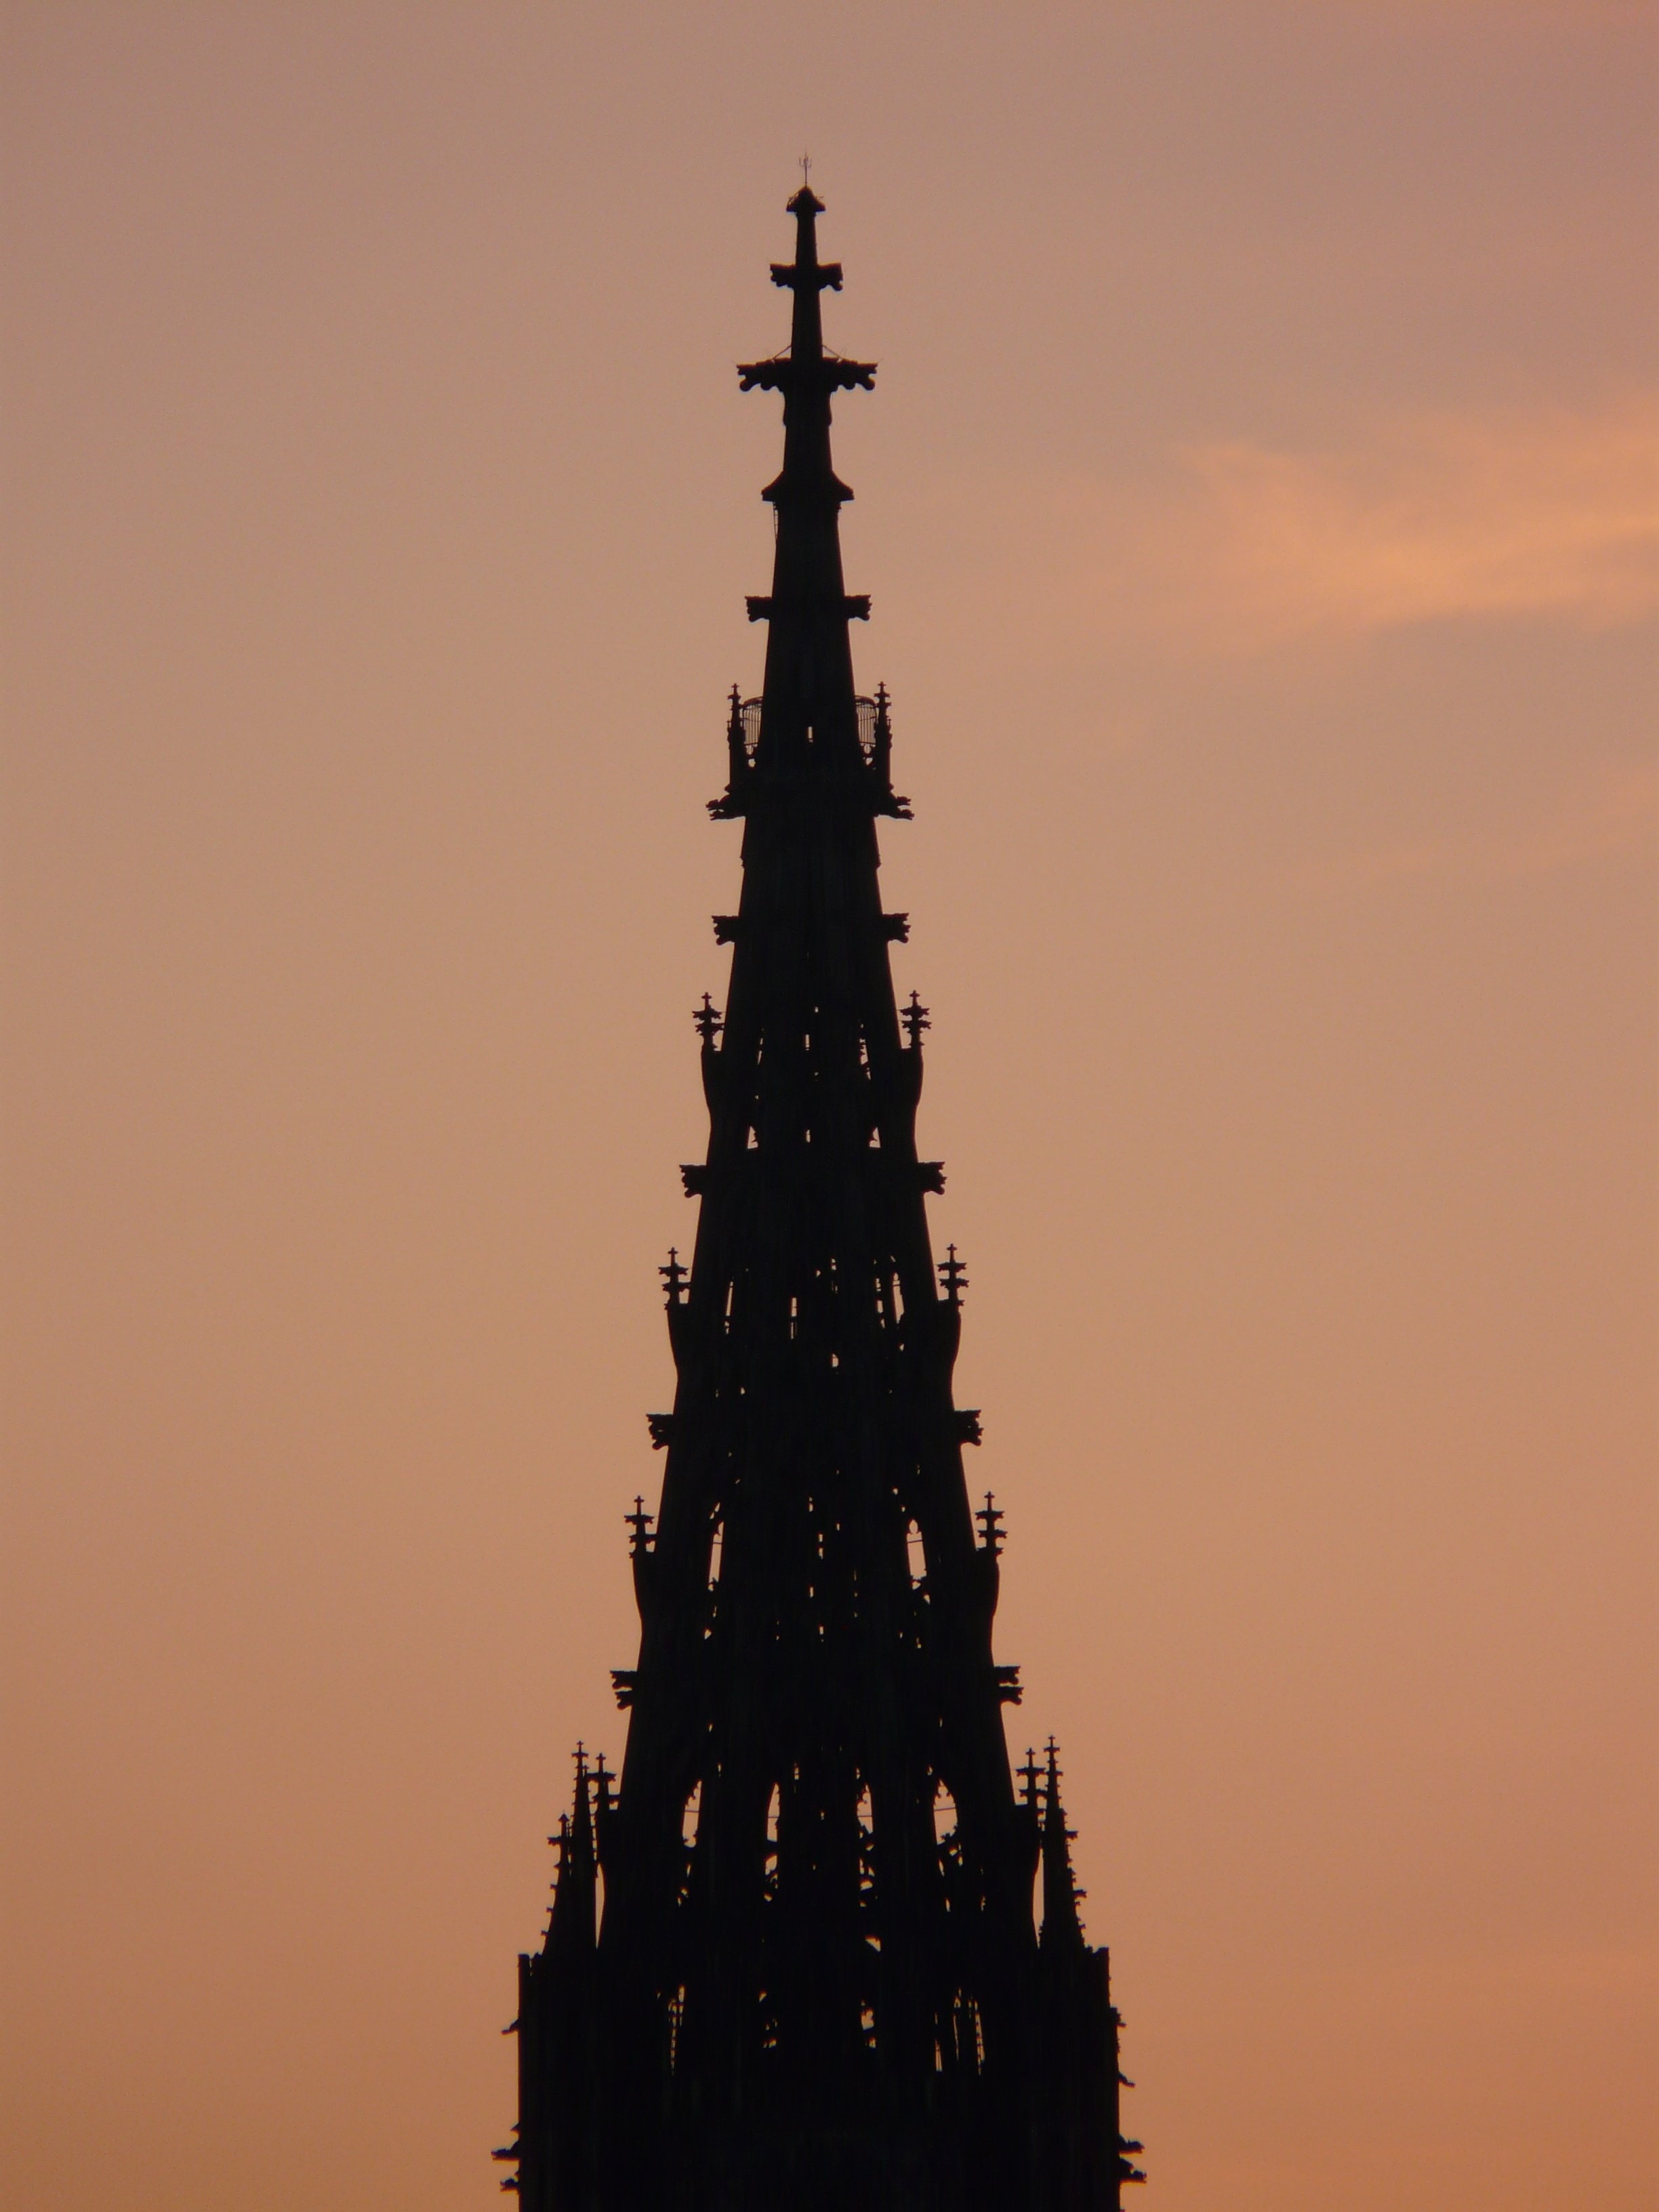 cathedral spire